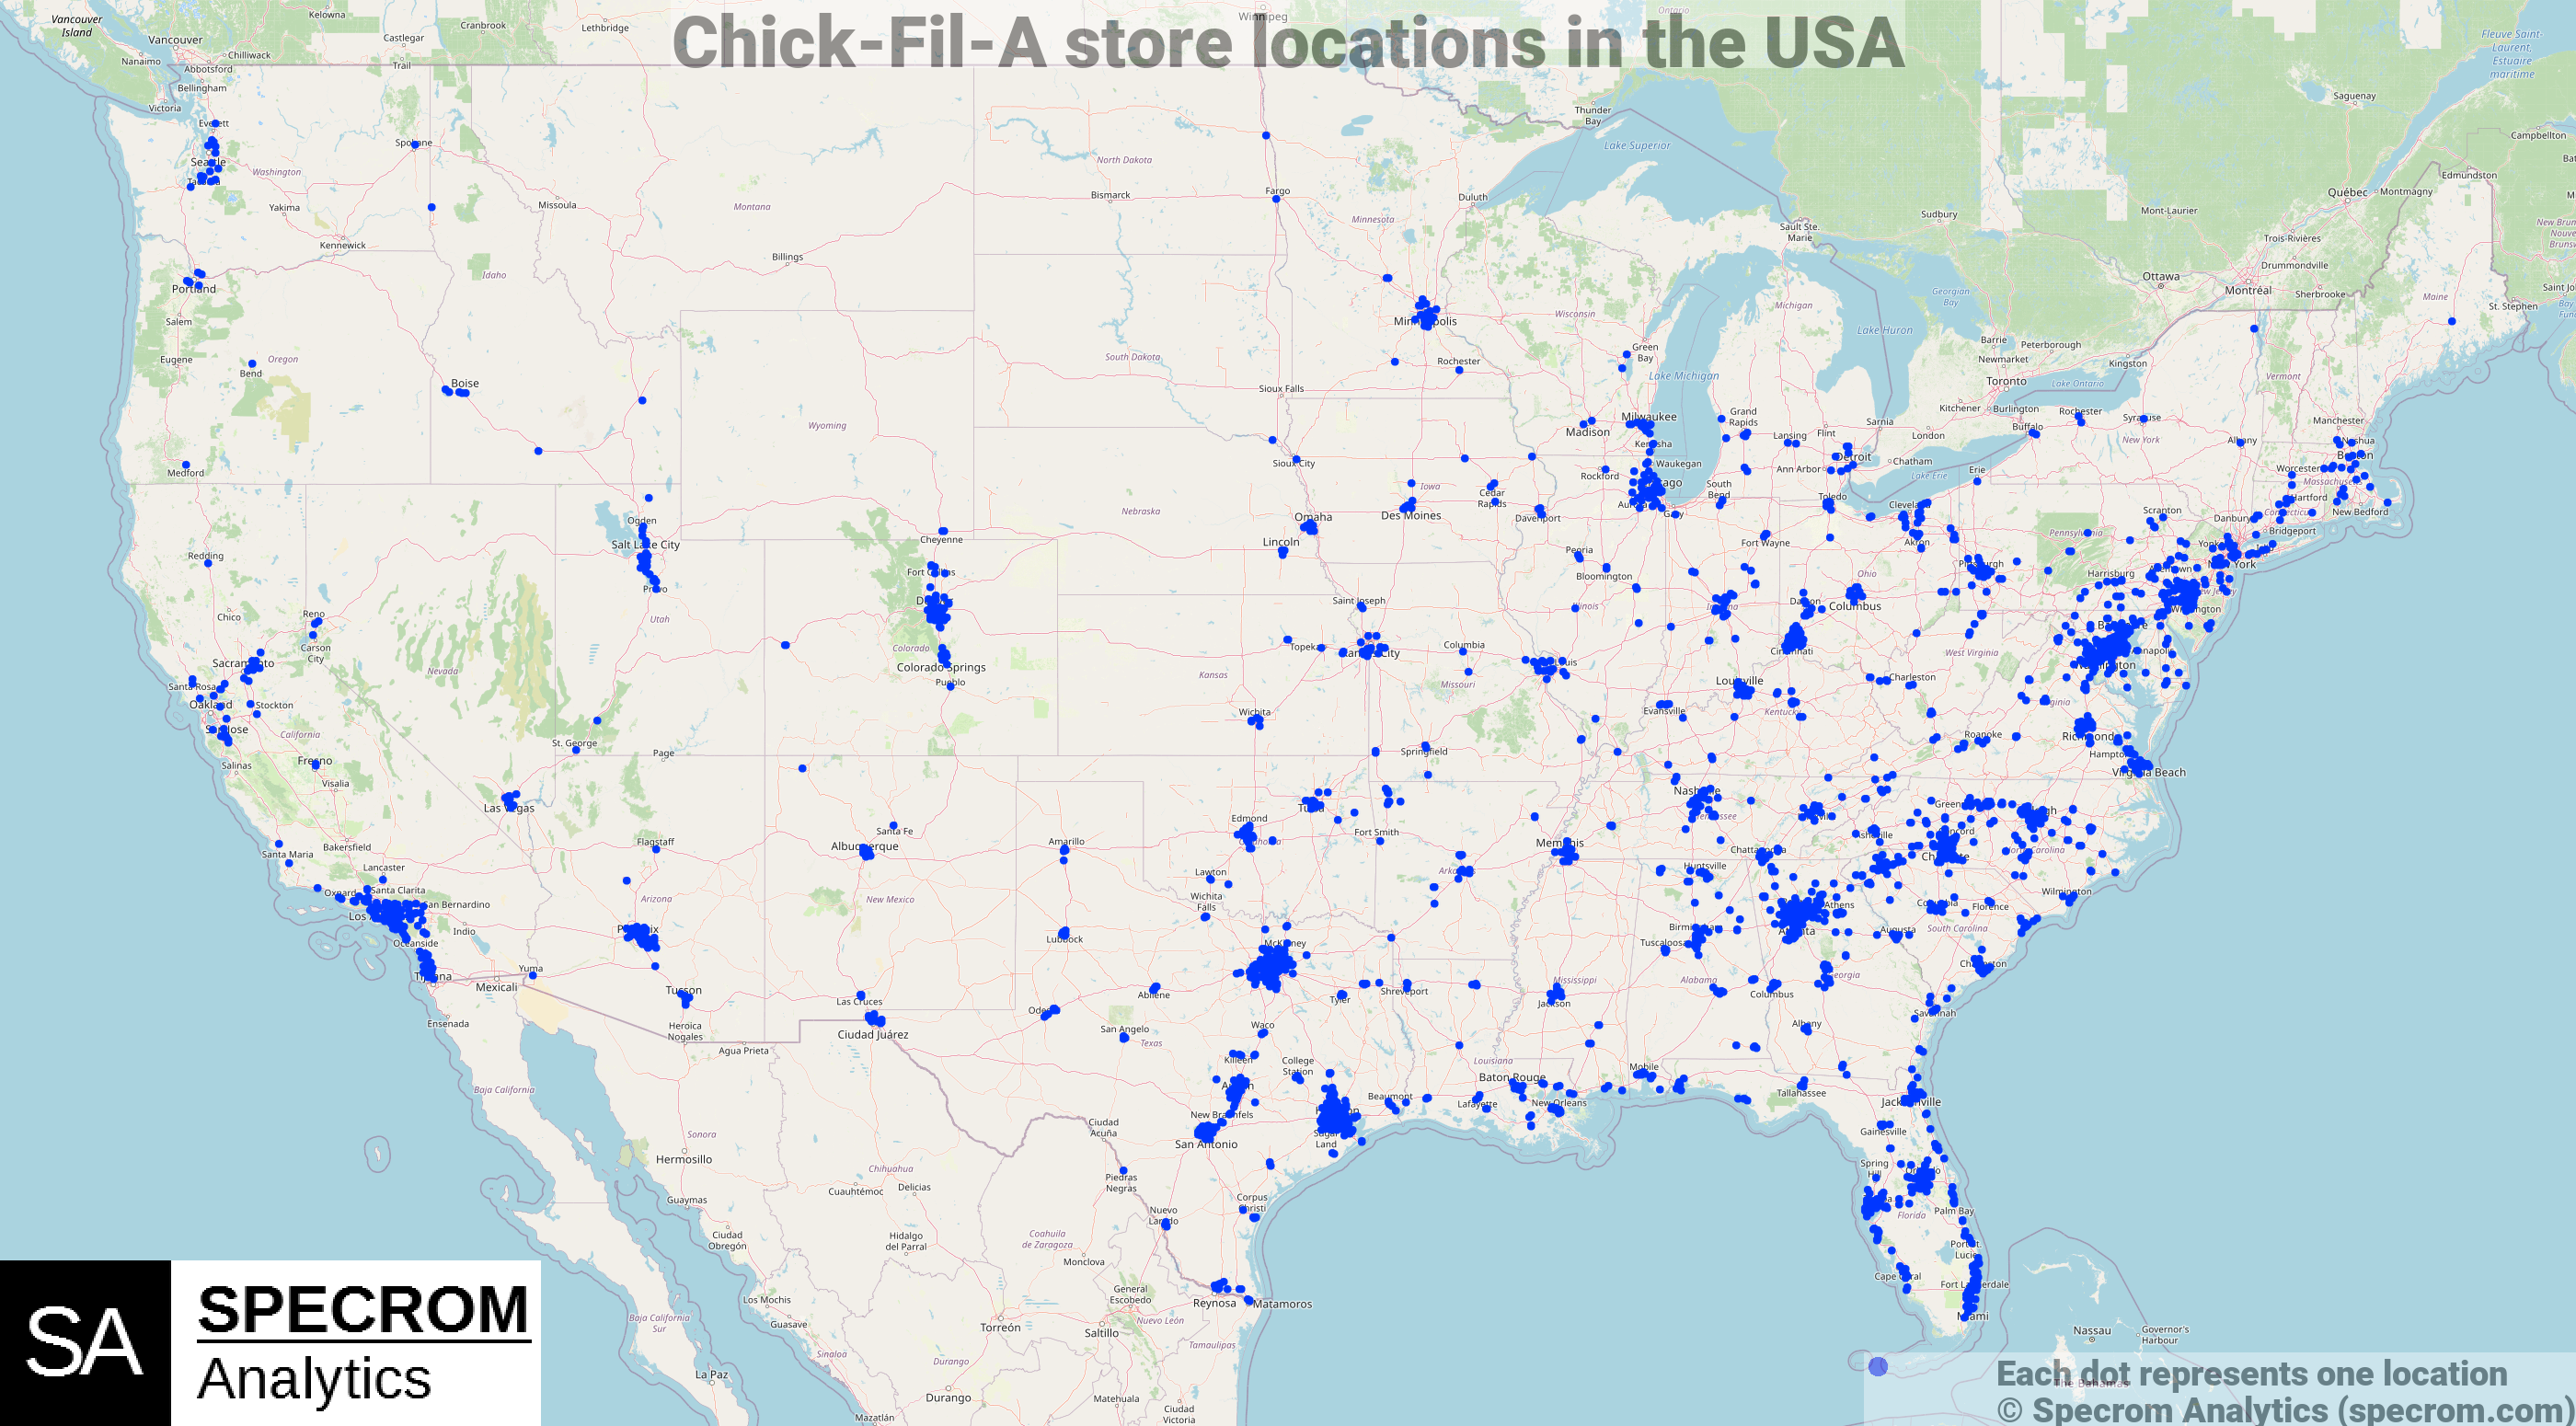 Chick-Fil-A store locations in the USA